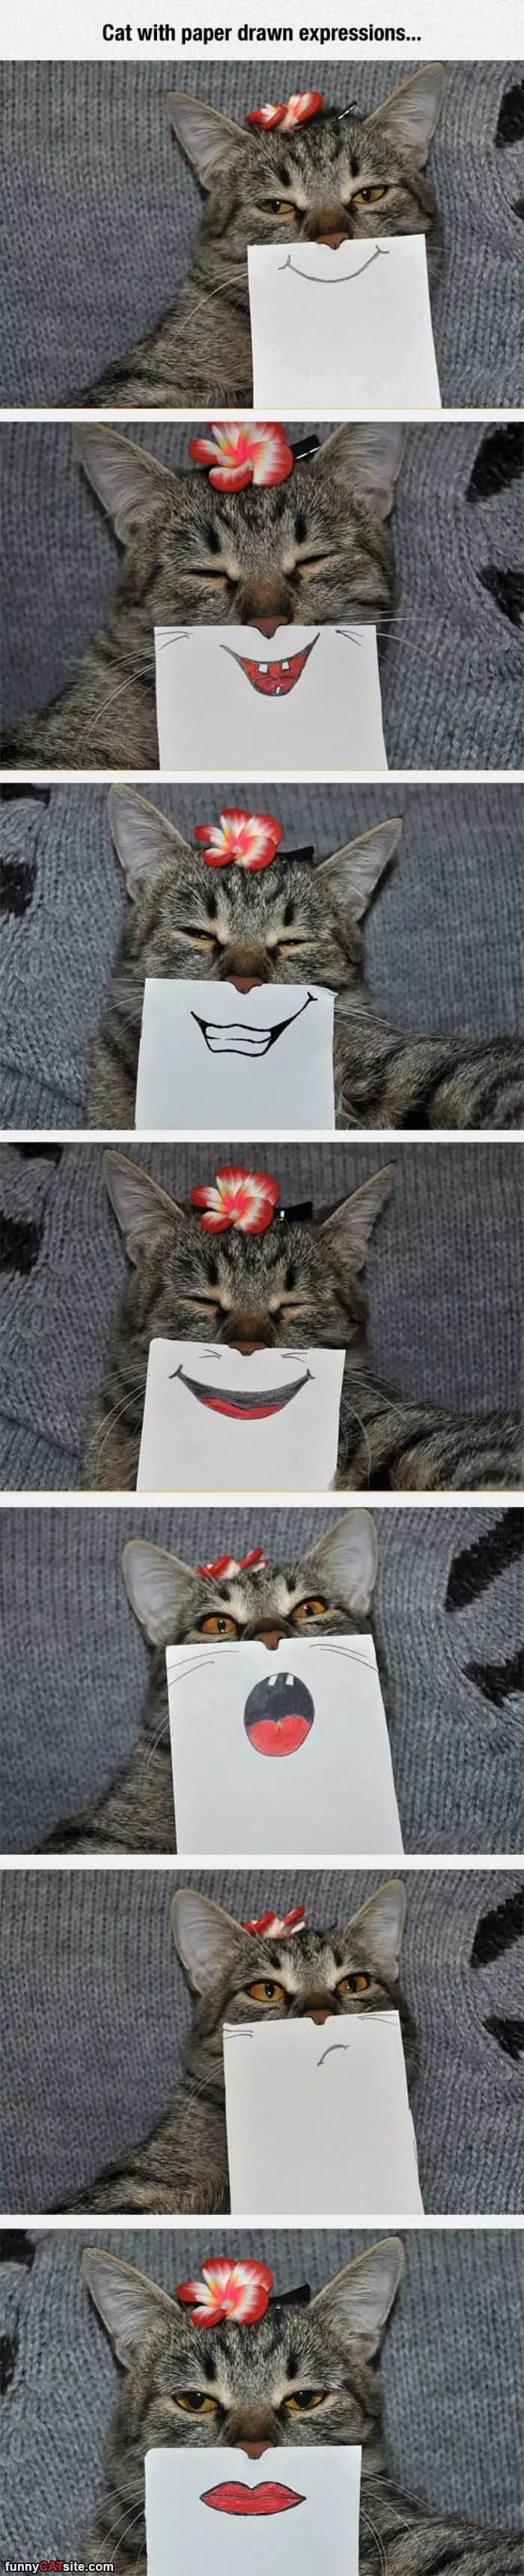 Cat With Drawn Expressions